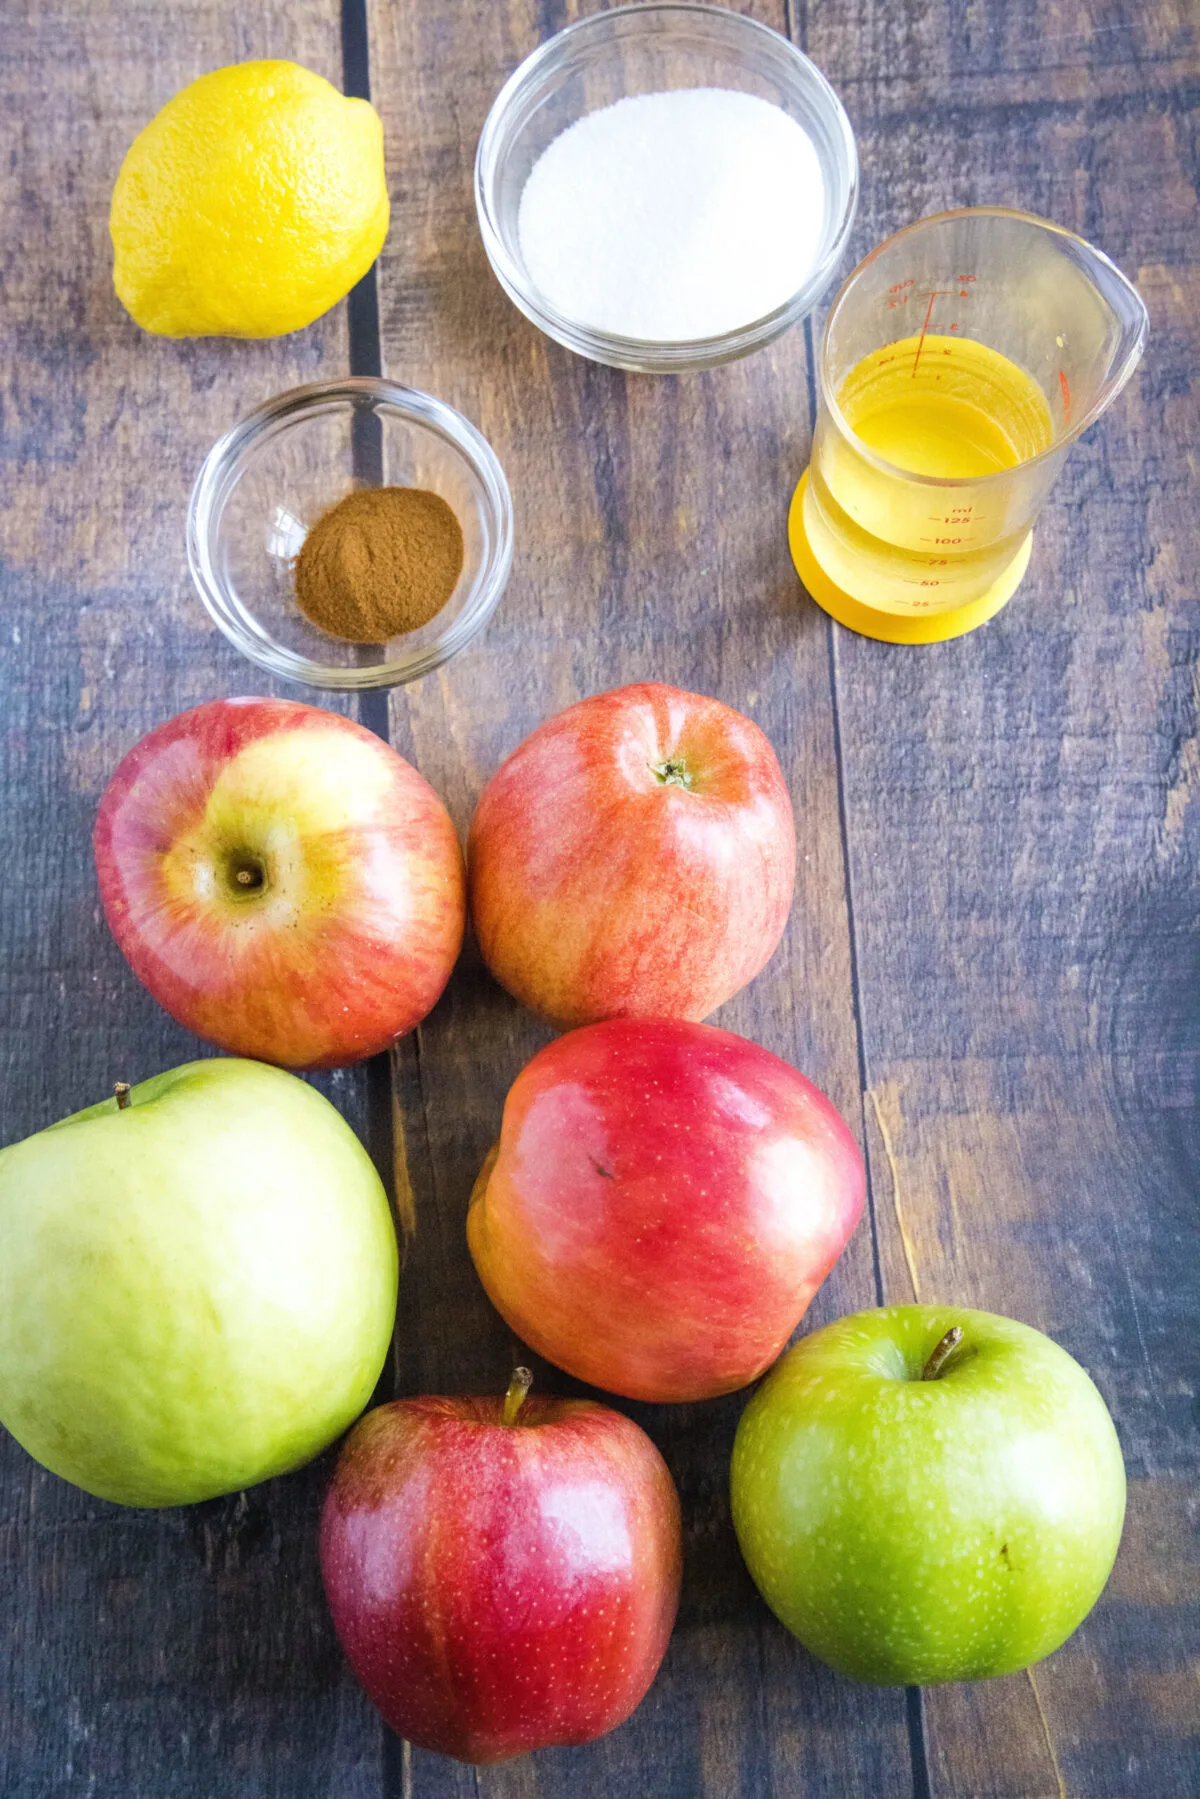 Overhead view of the ingredients needed for homemade applesauce: a variety of apples, a lemon, a bowl of cinnamon, a bowl of sugar, and a glass of water